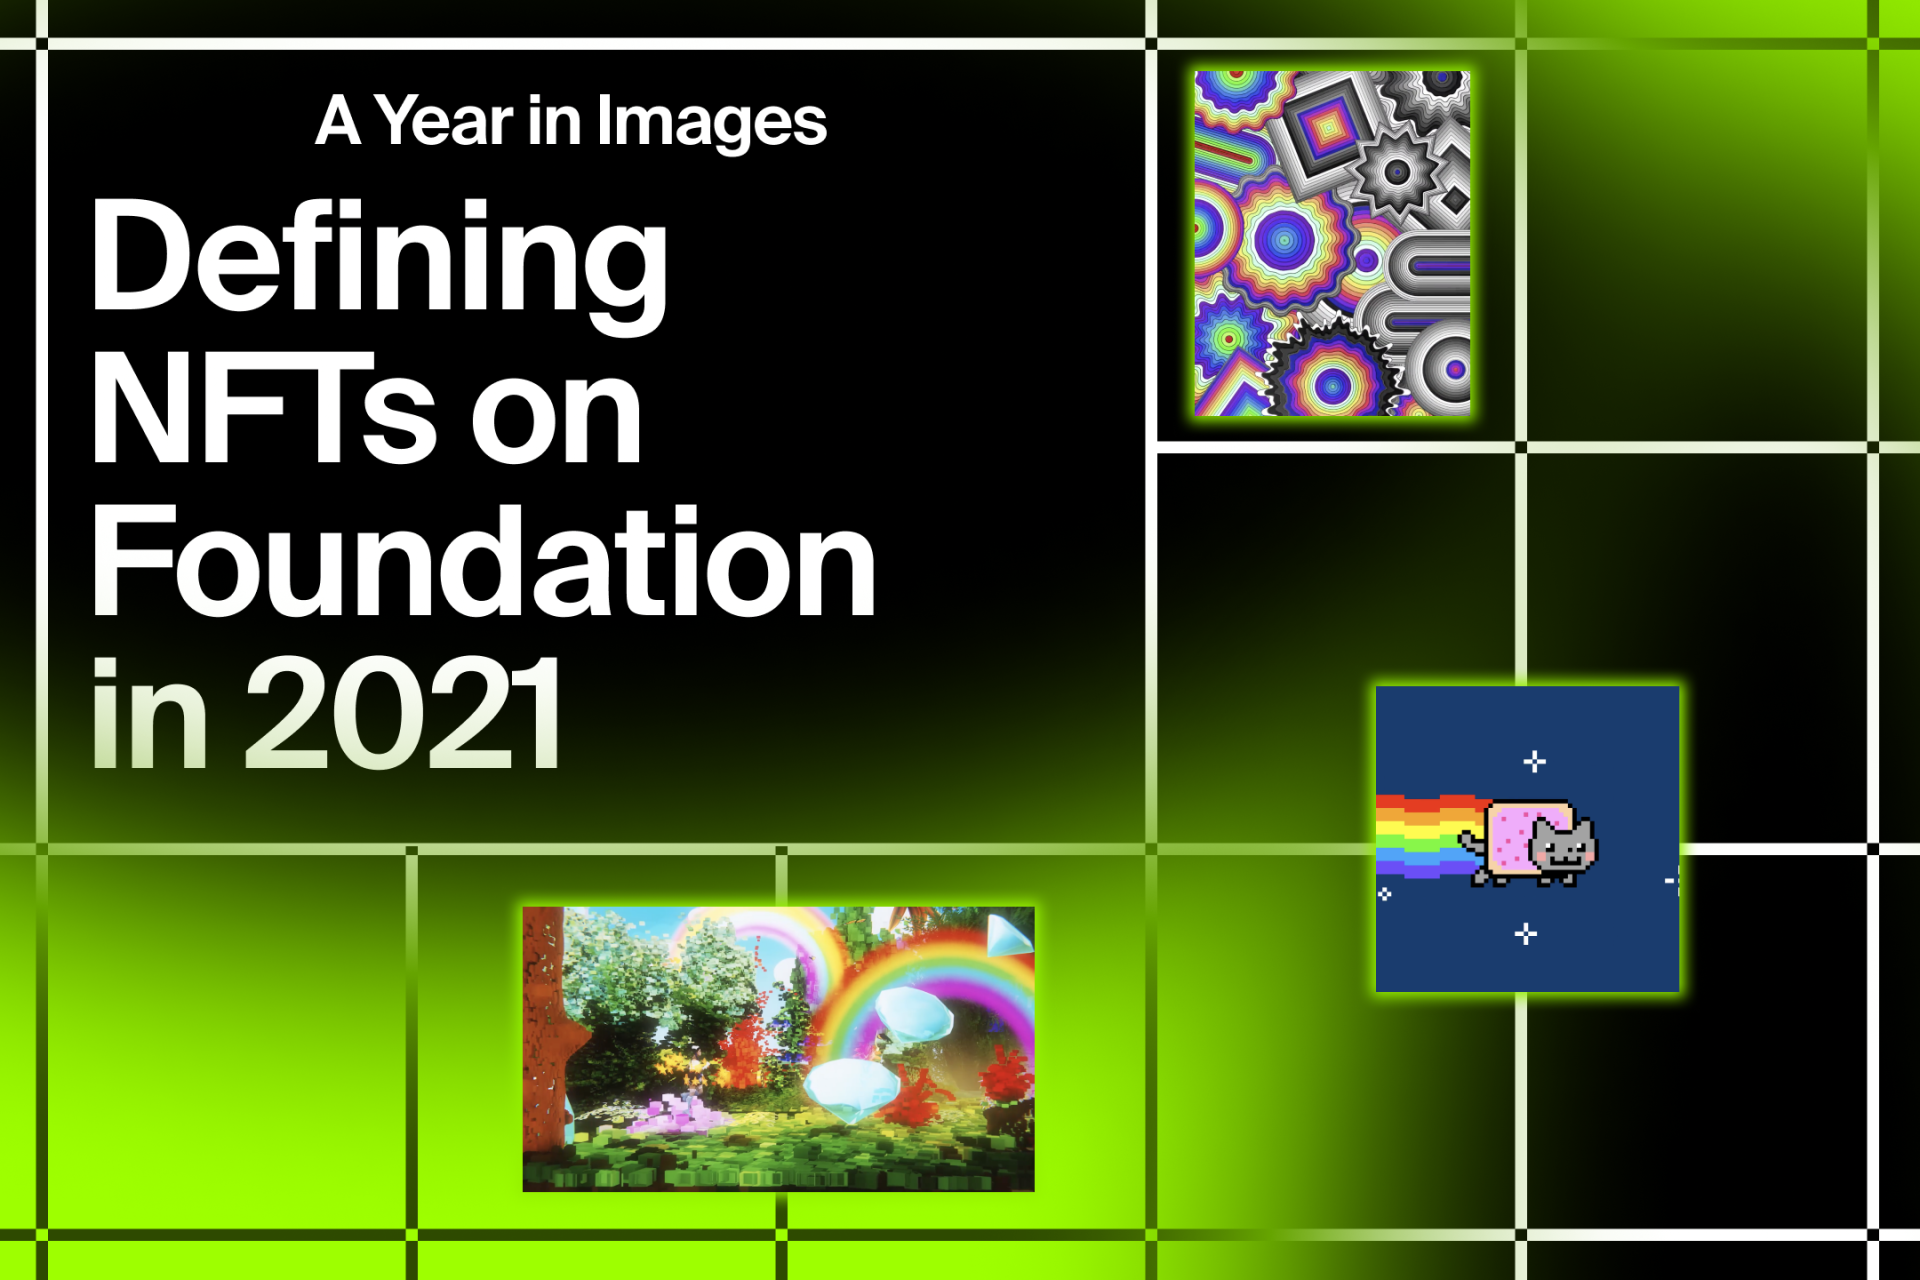 A Year in Images: Defining NFTs on Foundation in 2021